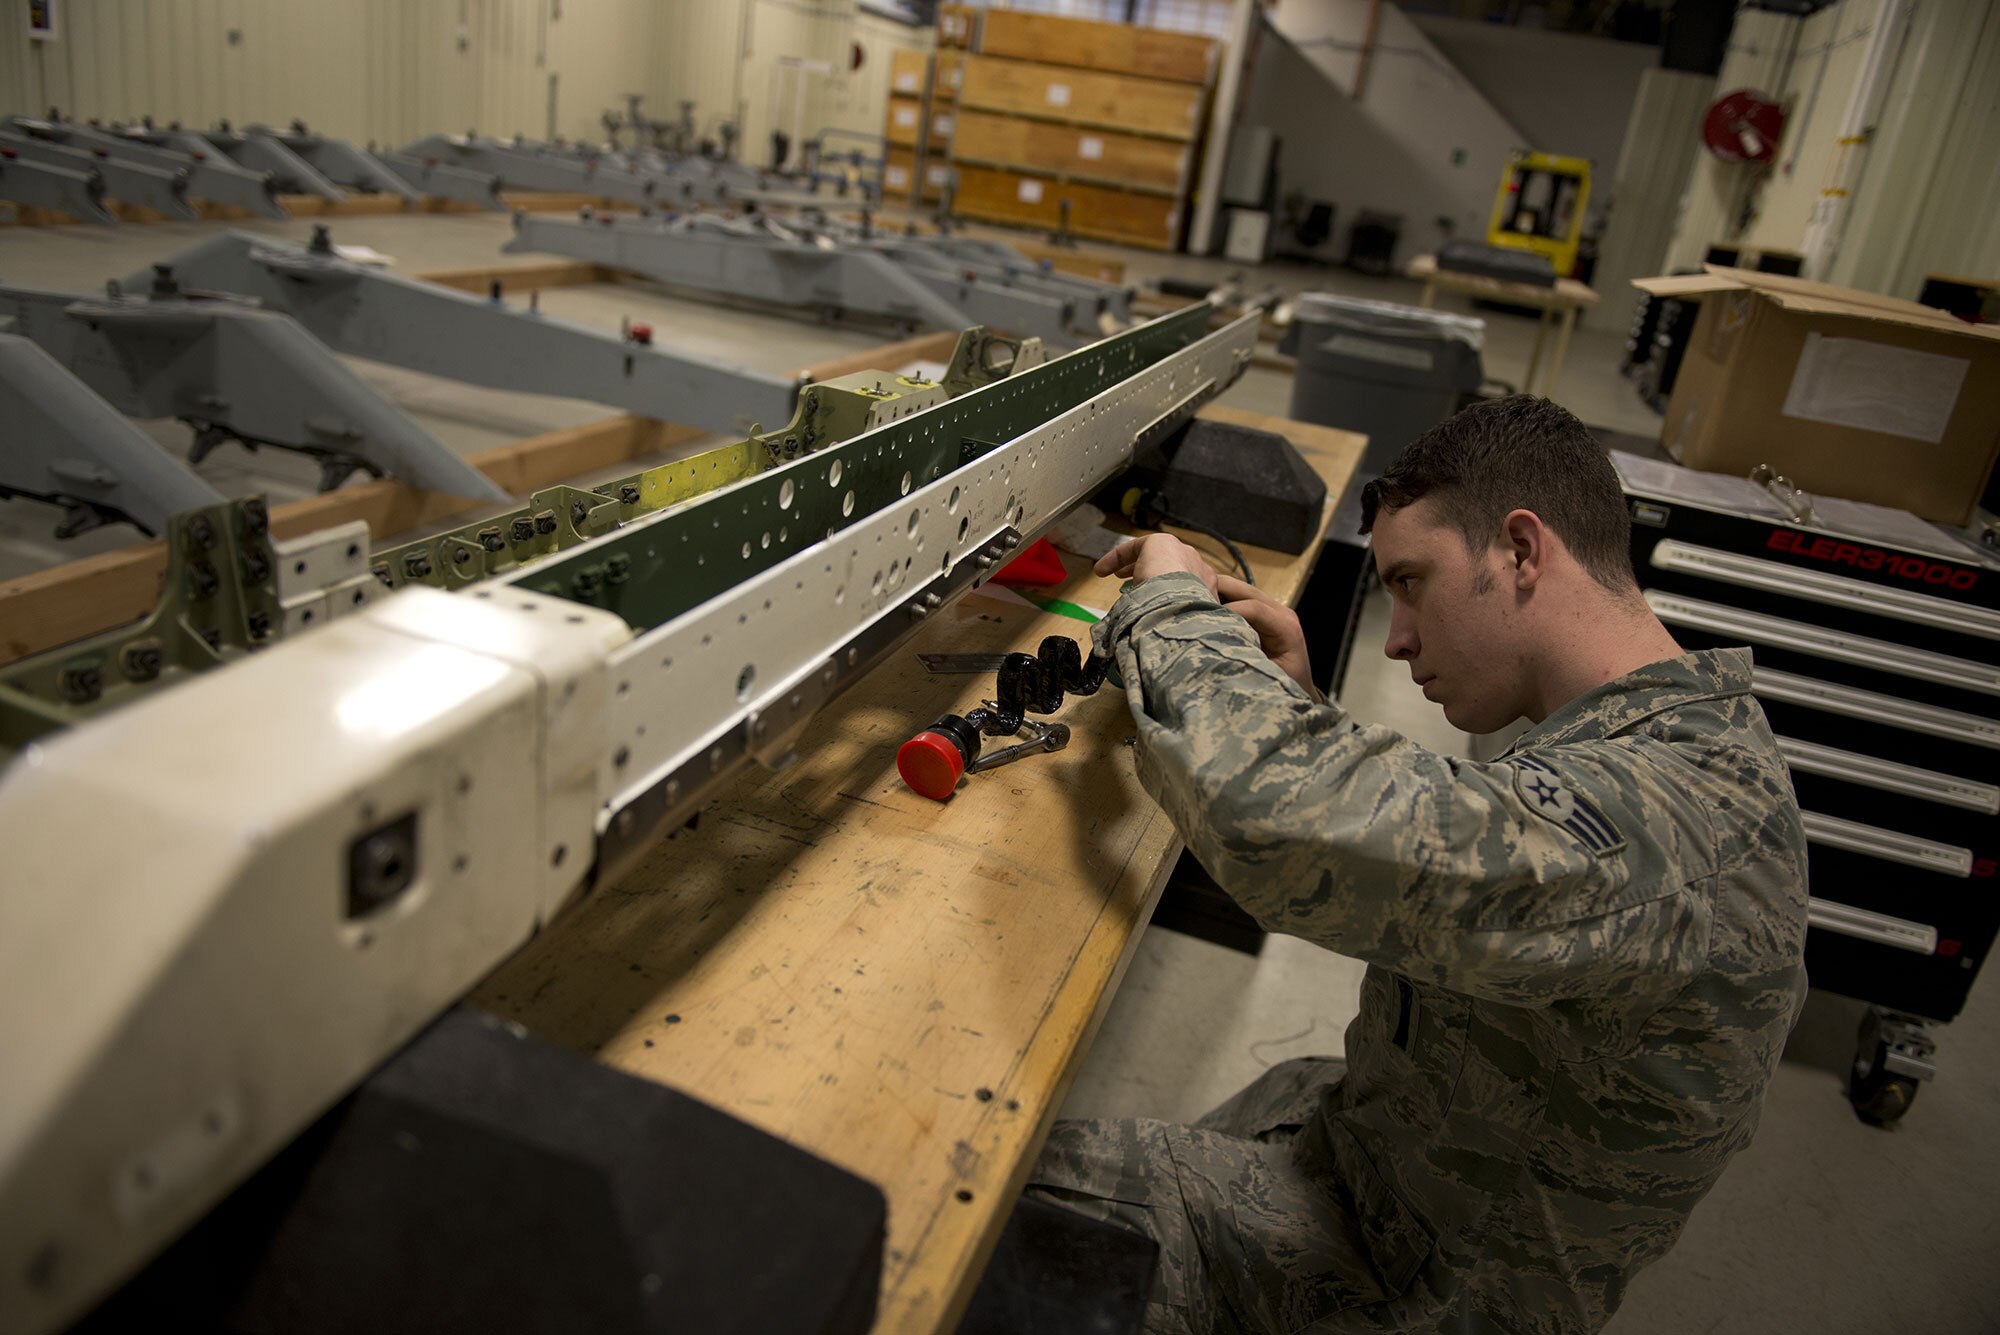 Senior Airman Dominic Hobbs, a 3rd Aircraft Maintenance Squadron weapons load crew member, works on a key part needed to equip the Air Intercept Missile-9X to an F-22 Raptor March 1. Each part originally took a week to complete, but by consolidating the 525th Aircraft Maintenance Unit, 90th Aircraft Maintenance Unit, and 3rd Munitions Squadron’s Armament flight into one temporary location, they have been able to reduce that time to 72 hours and complete enough rails ahead of schedule to allow for the first F-22 Raptor sortie with an AIM-9X to be flown March 1.0 (U.S. Air Force photo by Airman 1st Class Kyle Johnson)